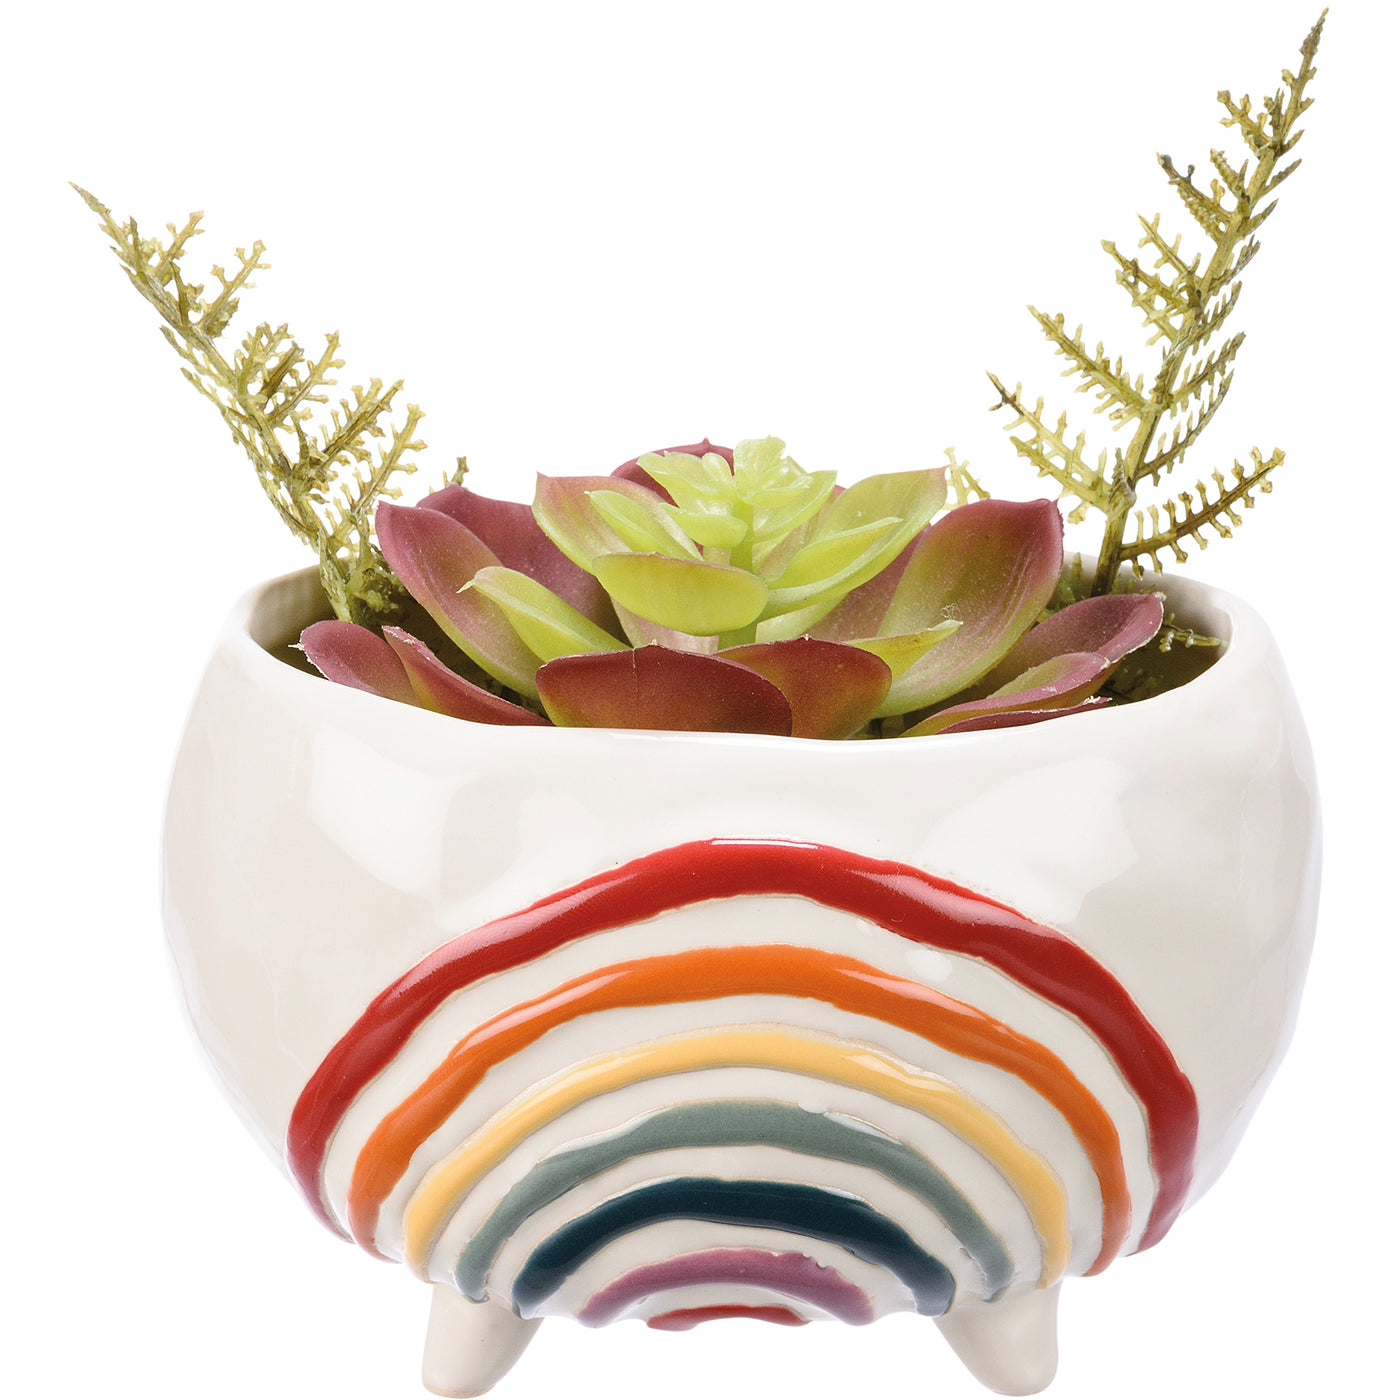 Rainbow Patterned Ceramic Footed Planter